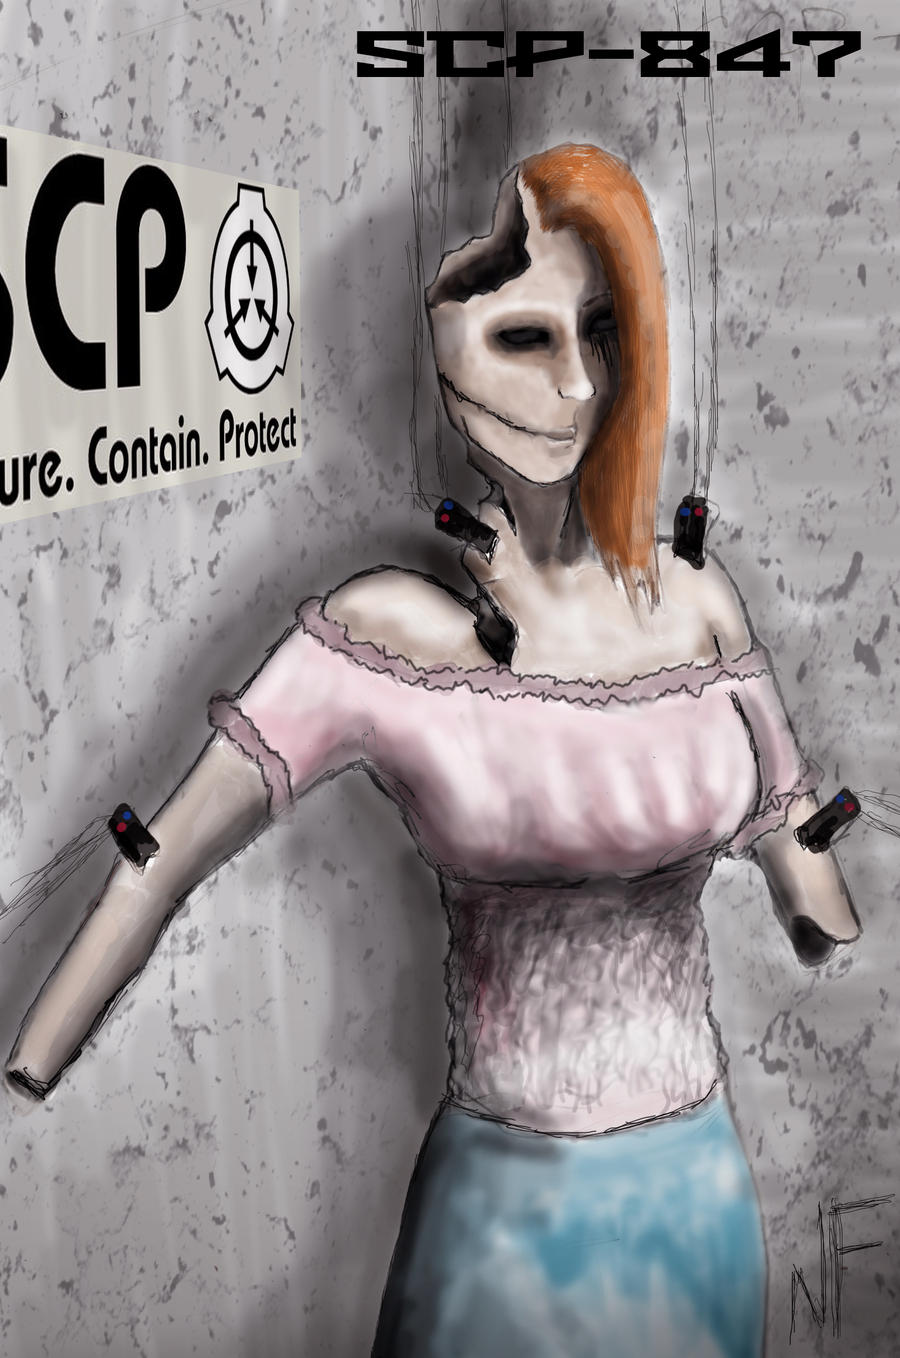 SCP Containment Breach by RoomsInTheWalls on DeviantArt